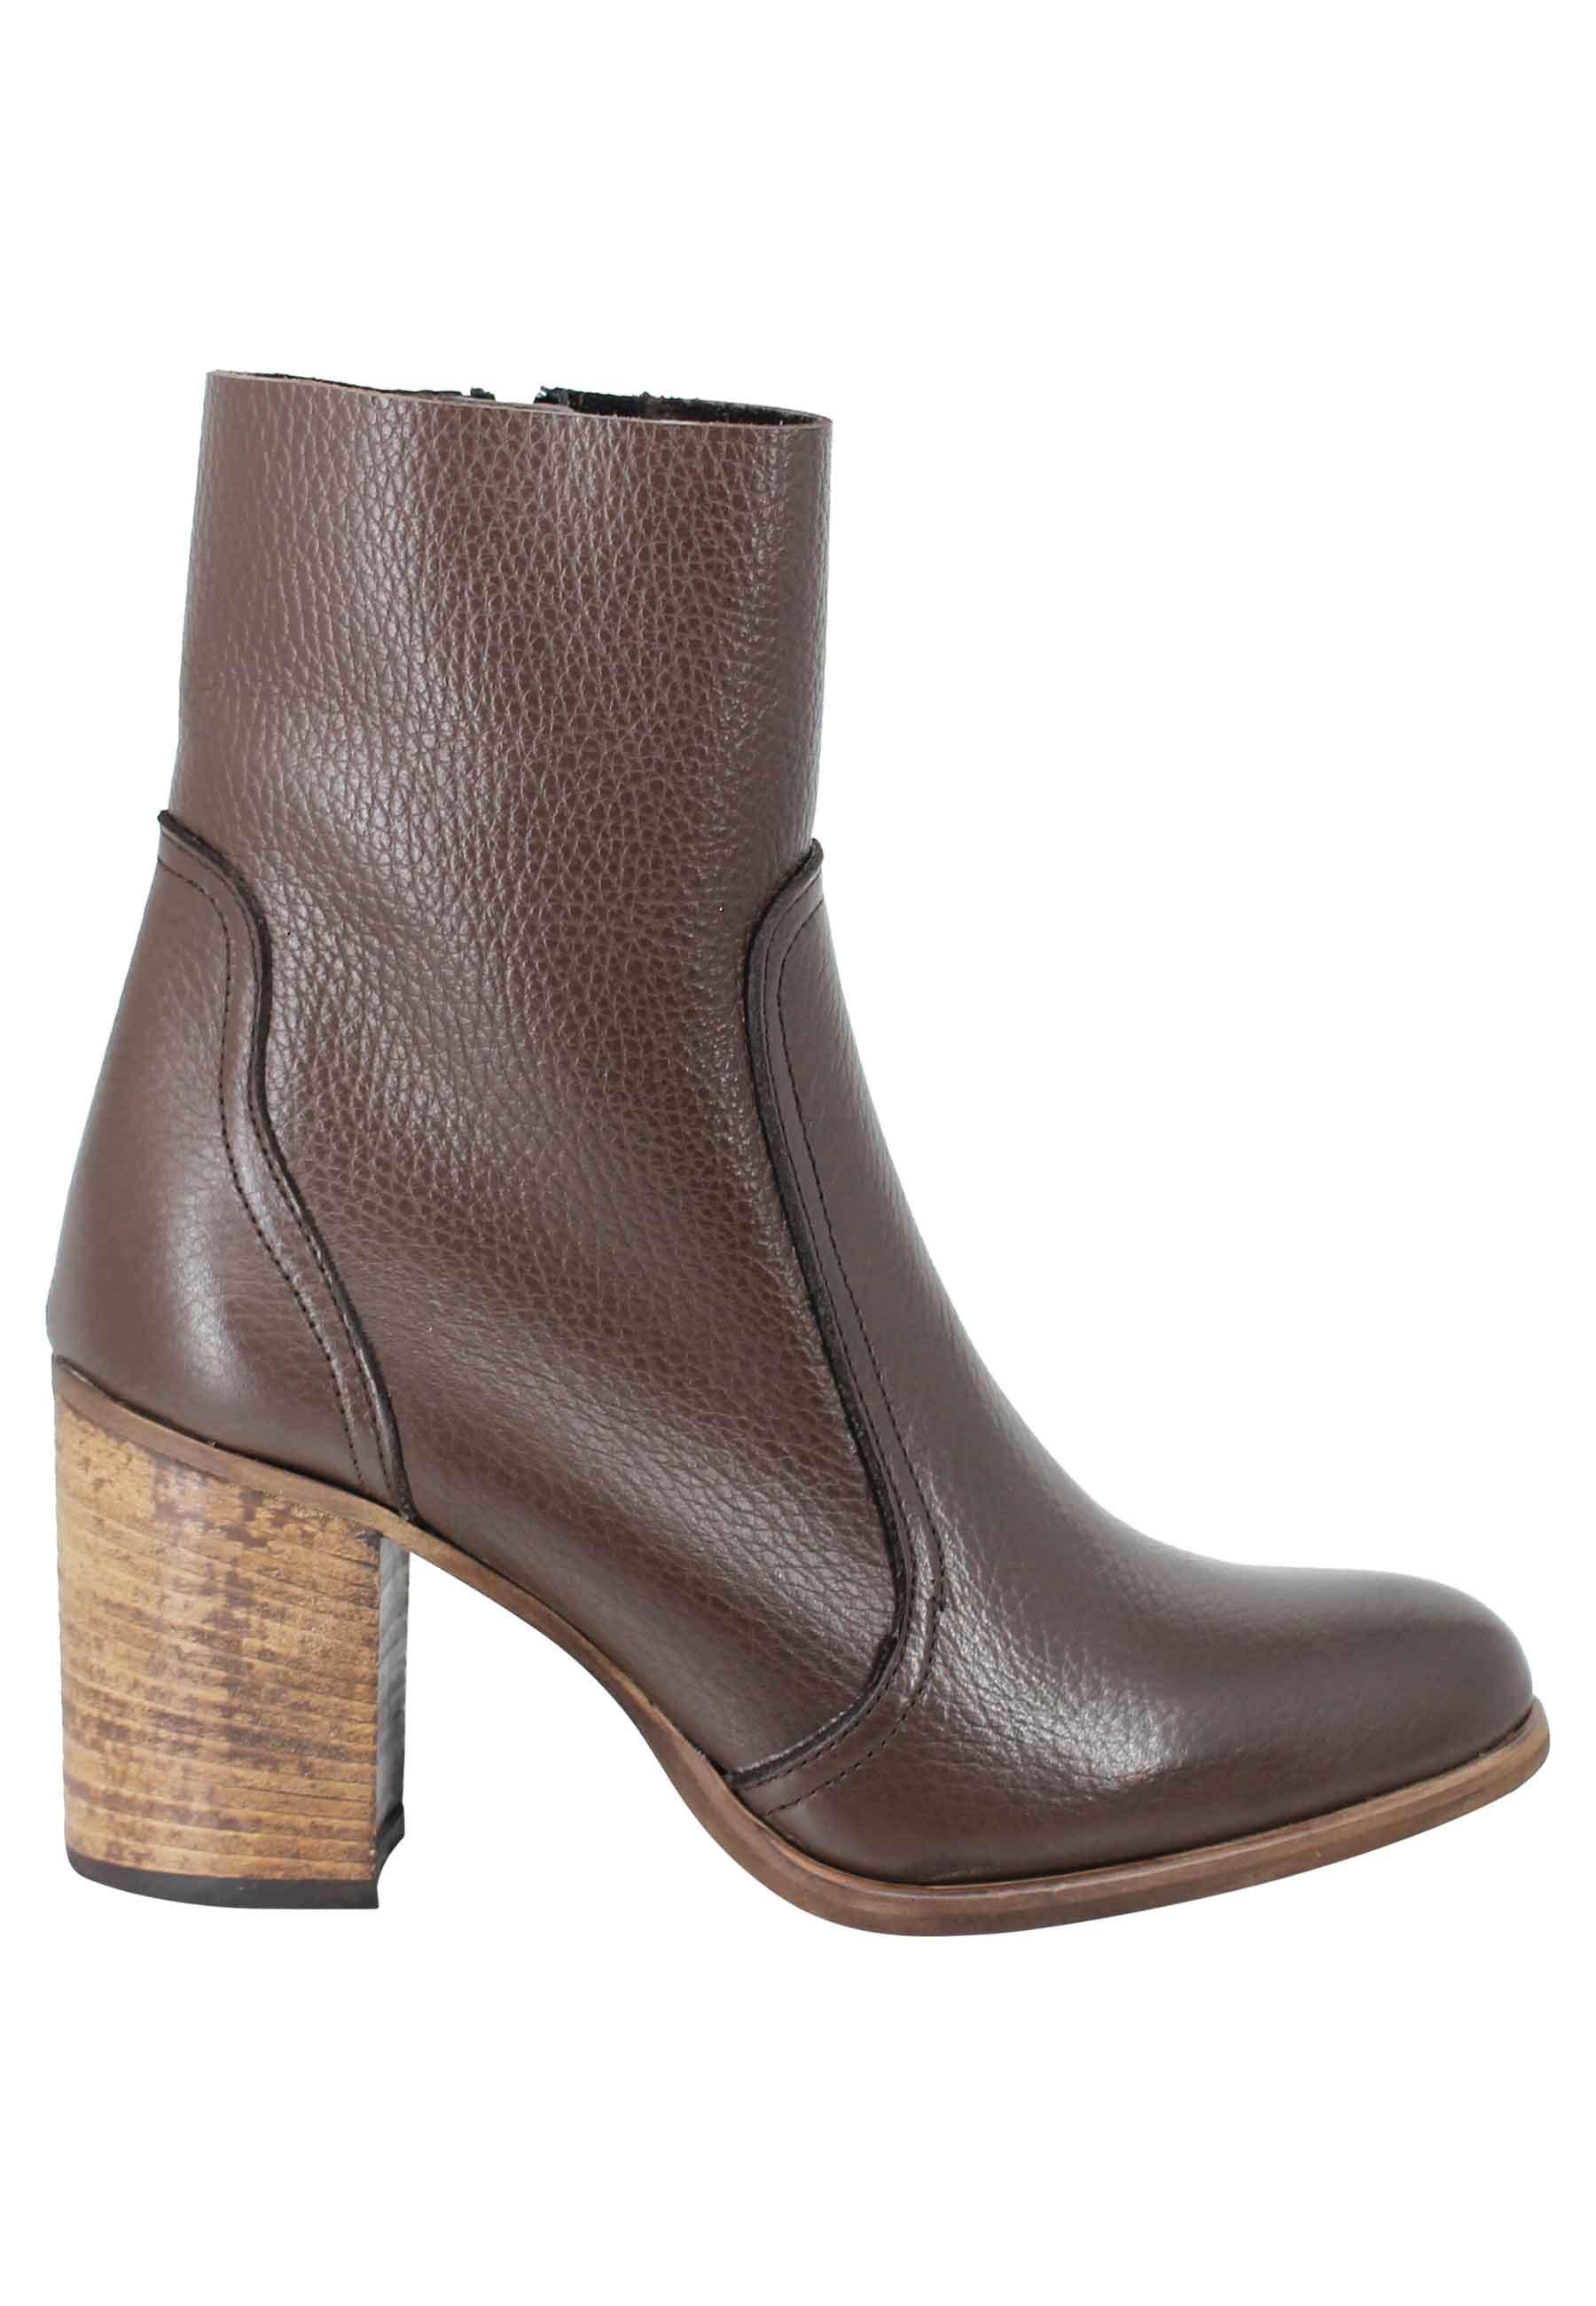 Women's brown leather ankle boots with leather heel and tapered toe with rubber sole